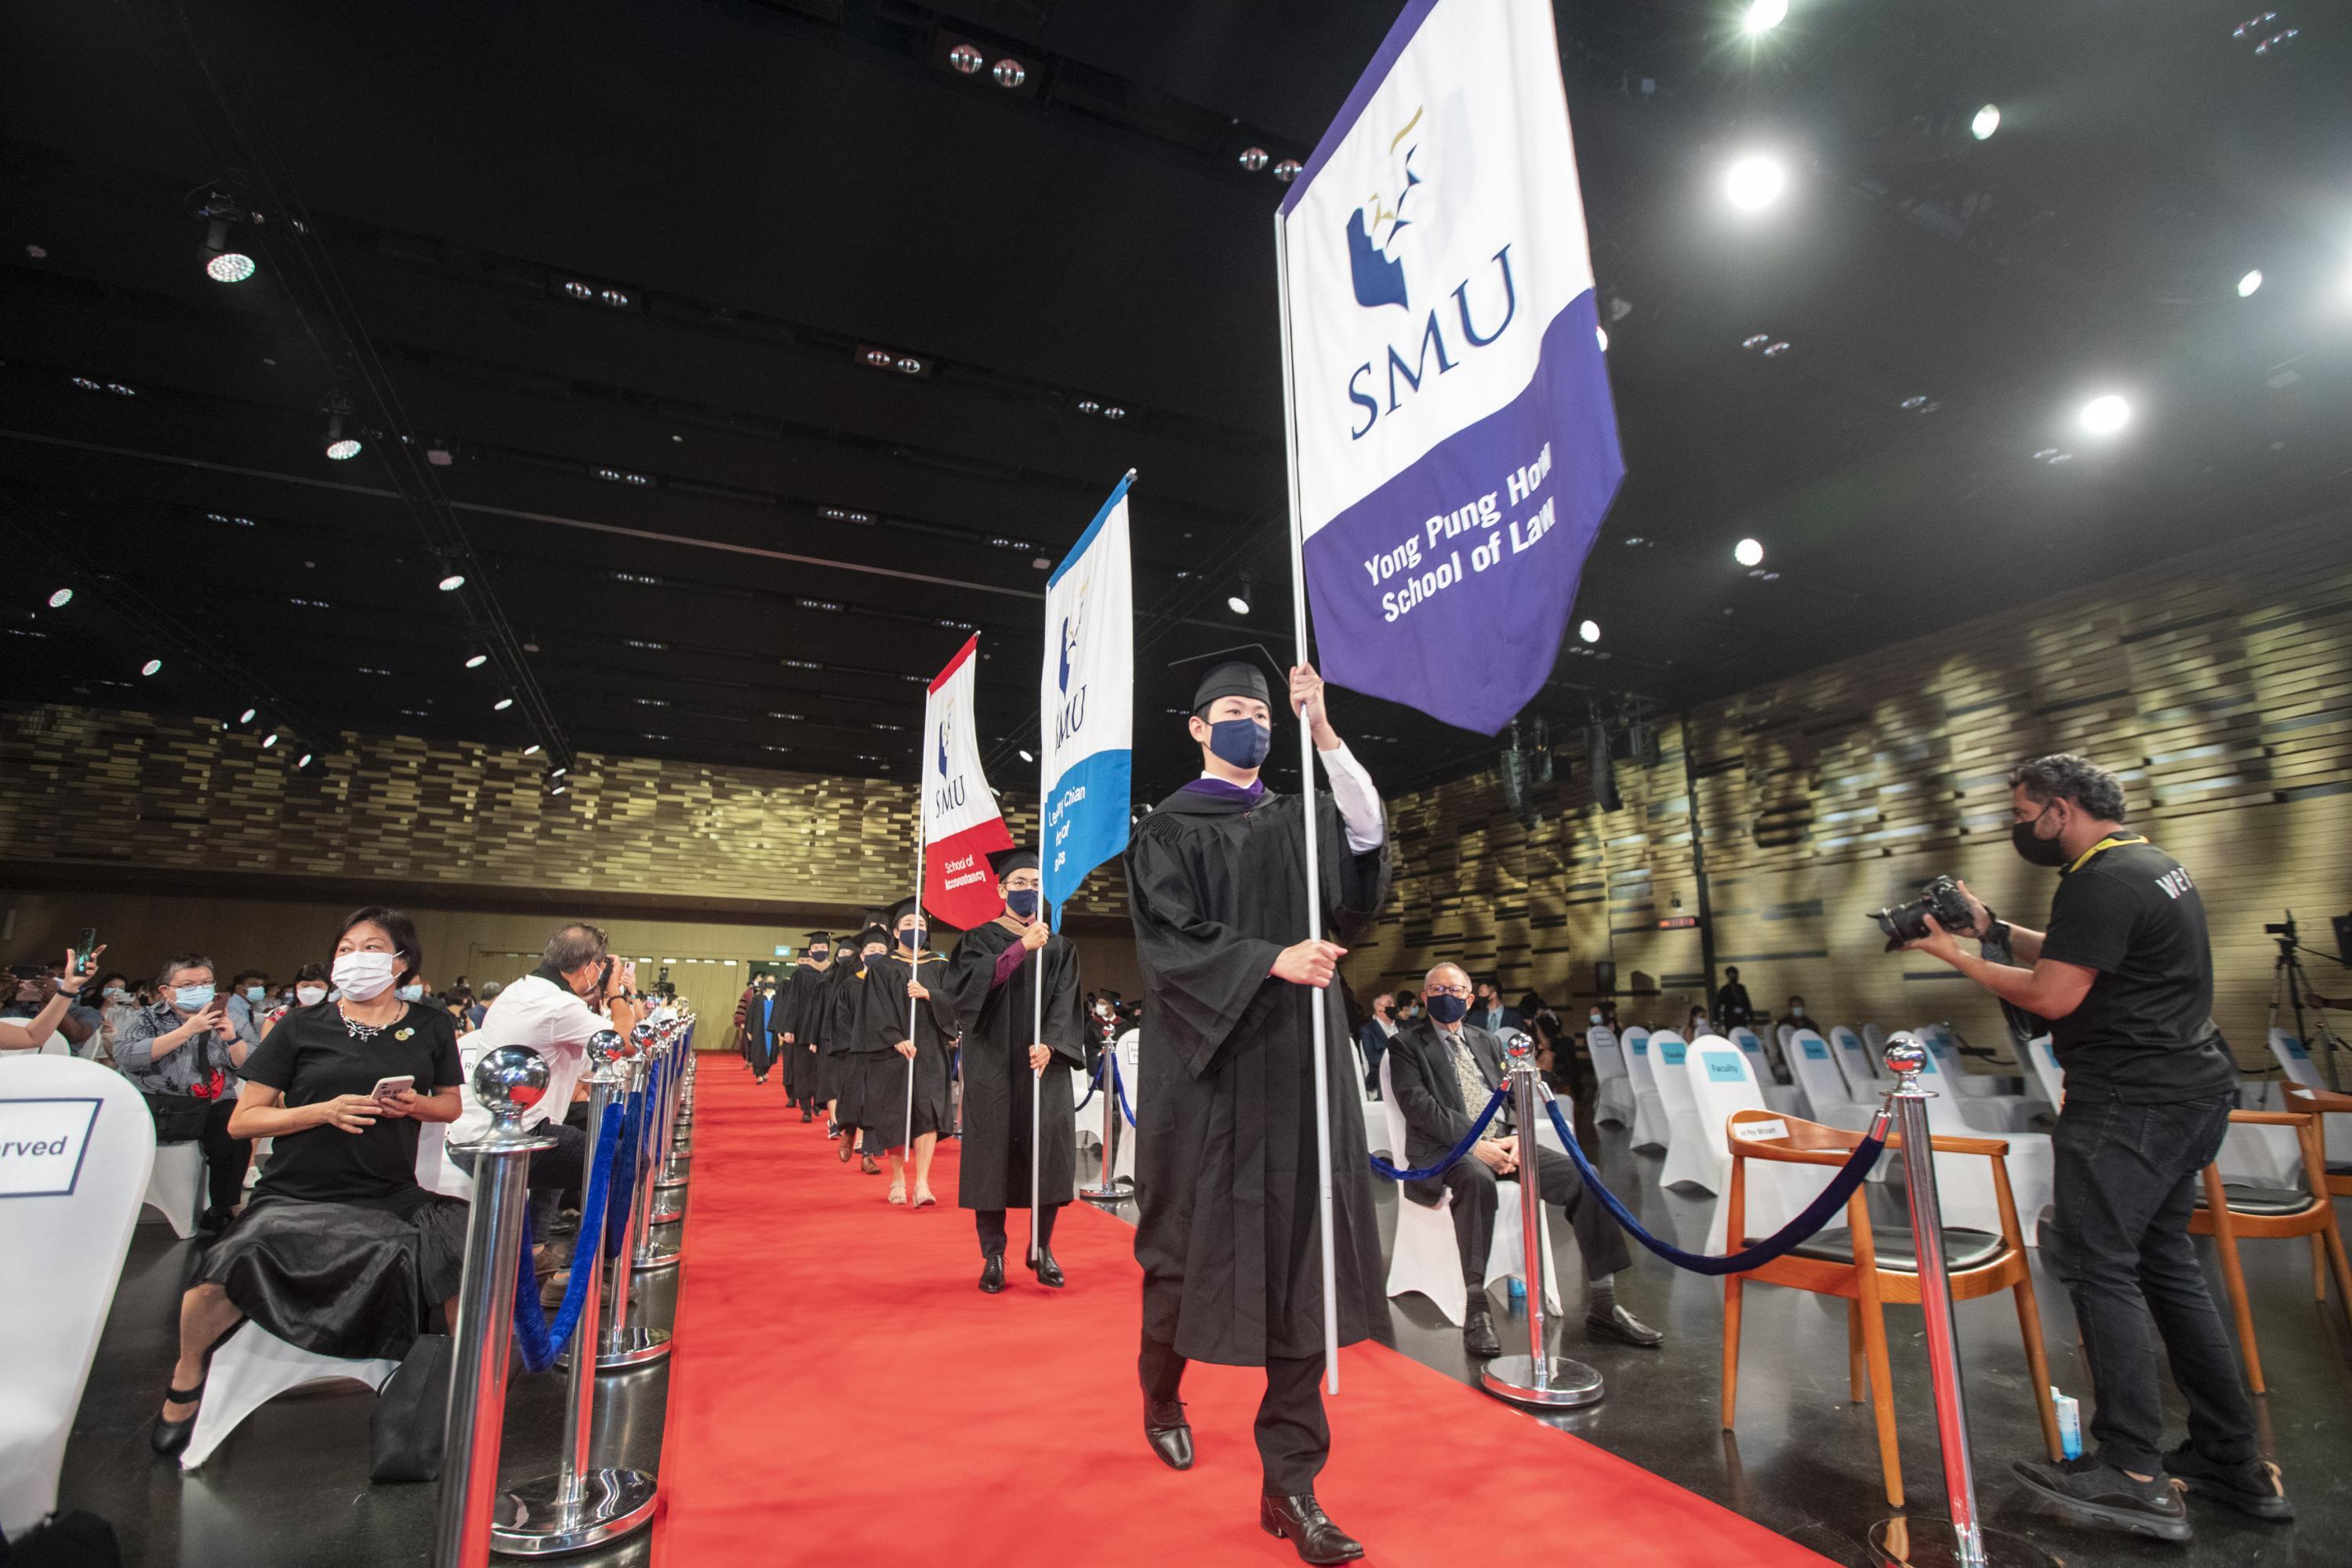 SMU holds inperson Commencement ceremonies to celebrate the graduation